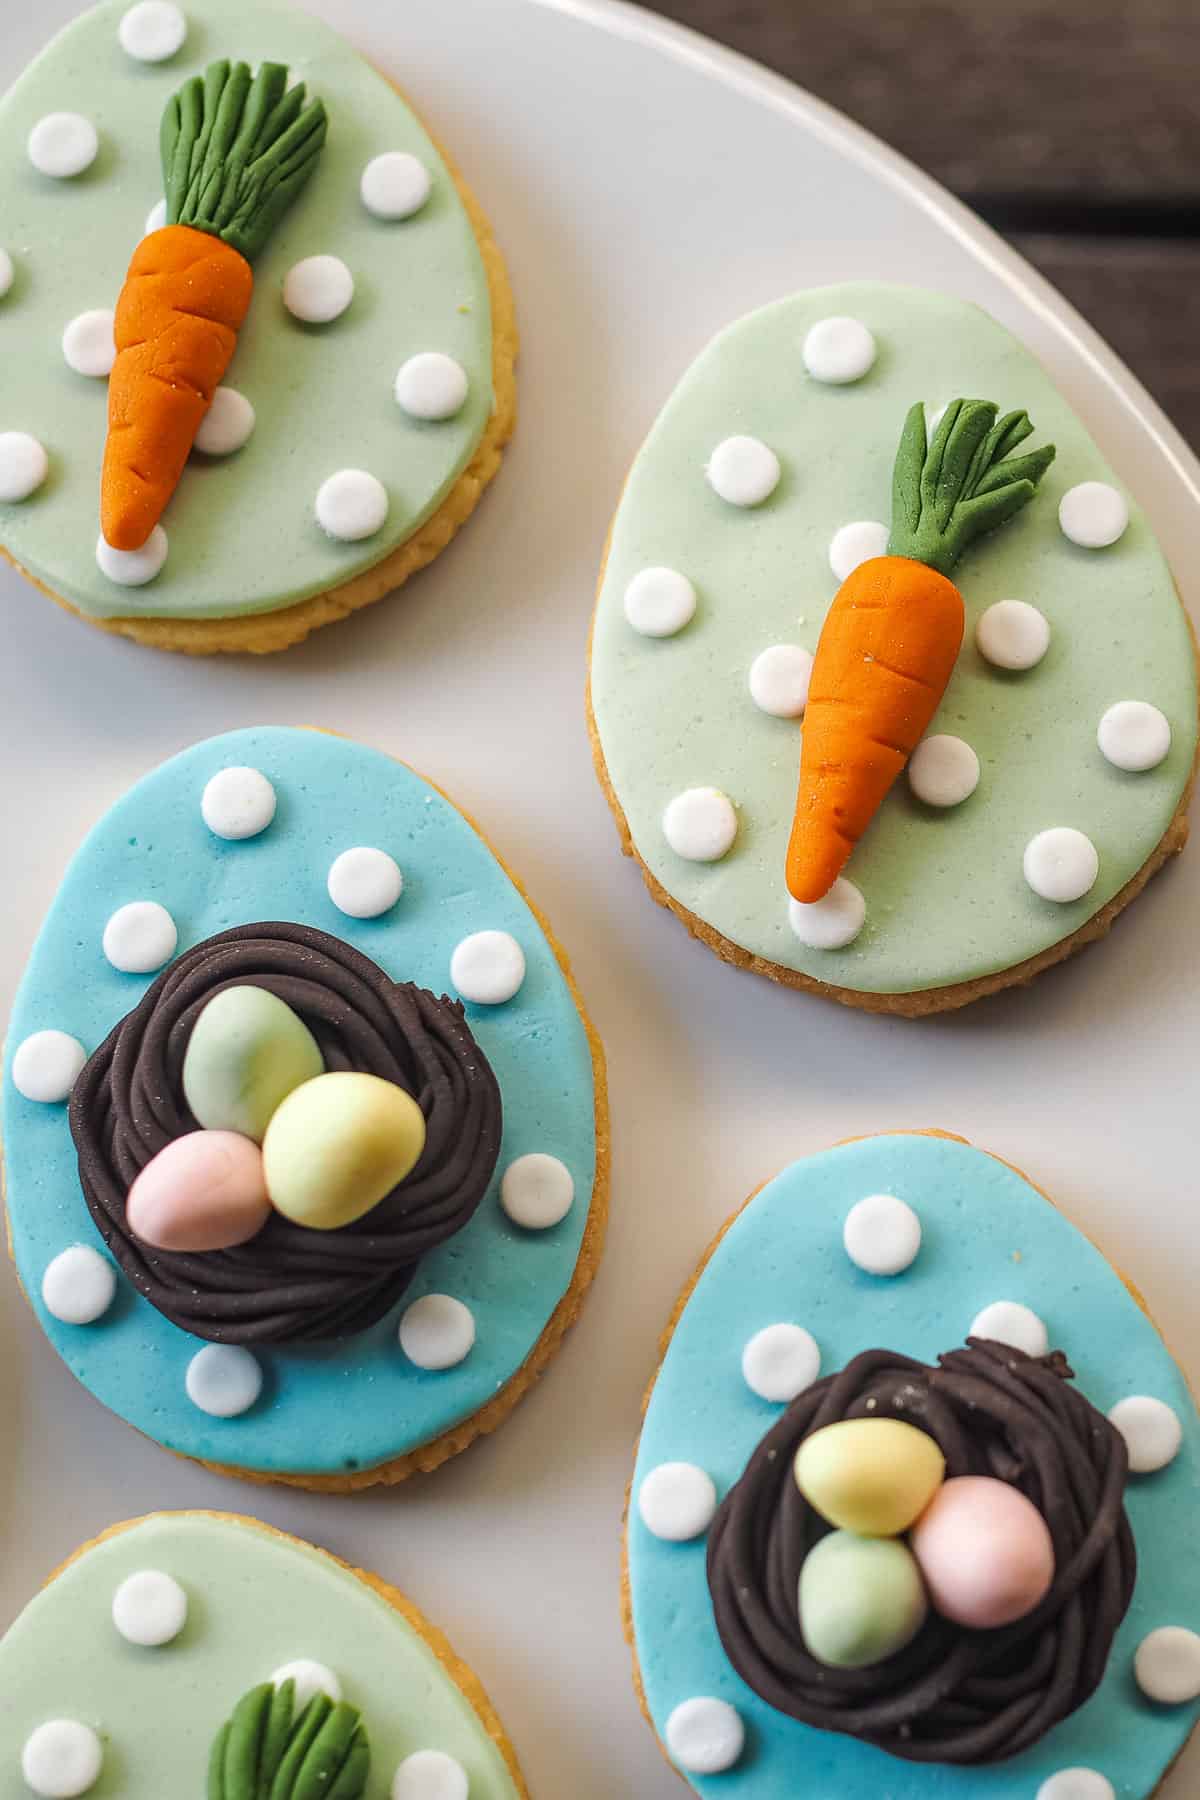 Egg shaped cookies in 2 design. First design with in blue background and white polka dots with 3D bird nest and 3 pastel green, pink and yellow fondant eggs in. The second design is green background with white polka dots and fondant carrot.